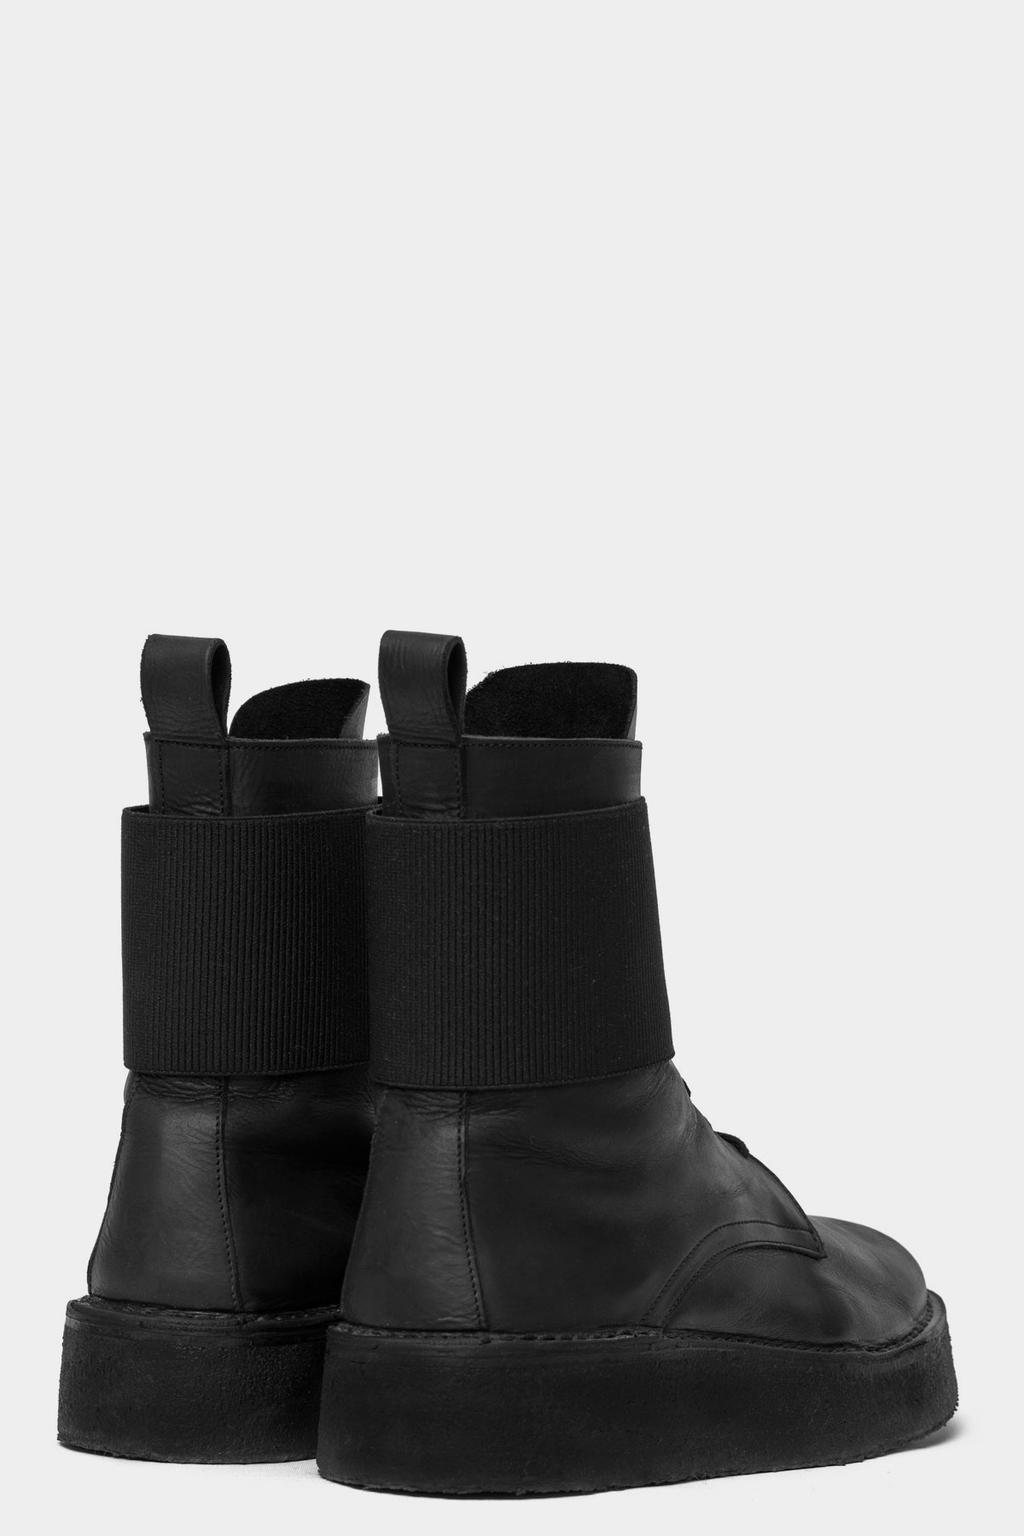 OA 06-1 Solid Boot High top boot in genuine treated black leather with solid heavy para sole. Height of sole is 4 cm at heel point.